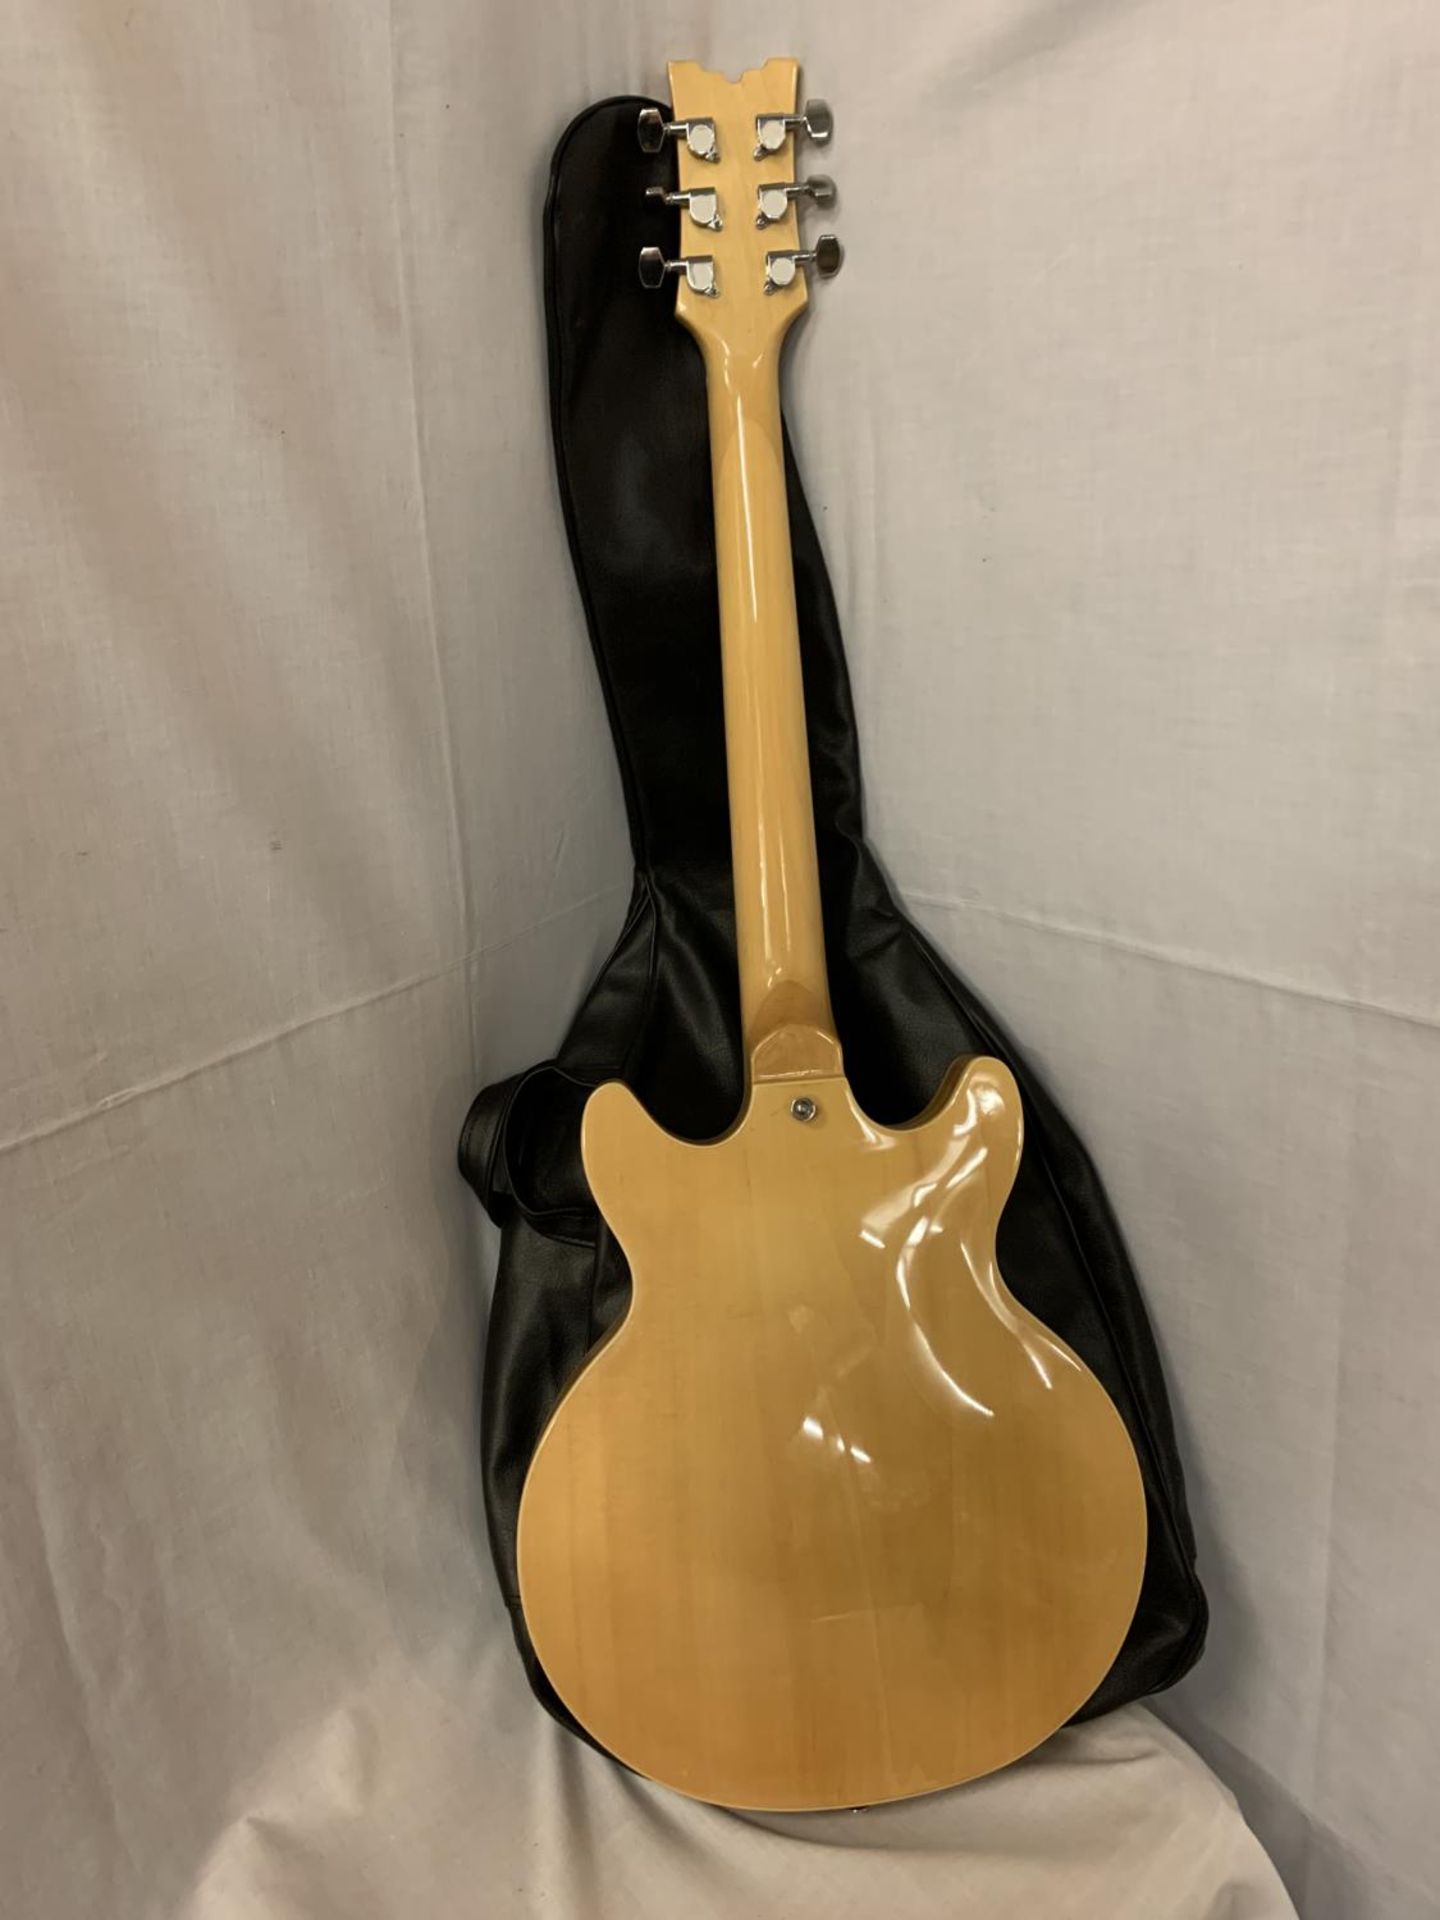 A CHERRYSTONE ELECTRO ACCOUSTIC GUITAR WITH CASE - Image 5 of 5